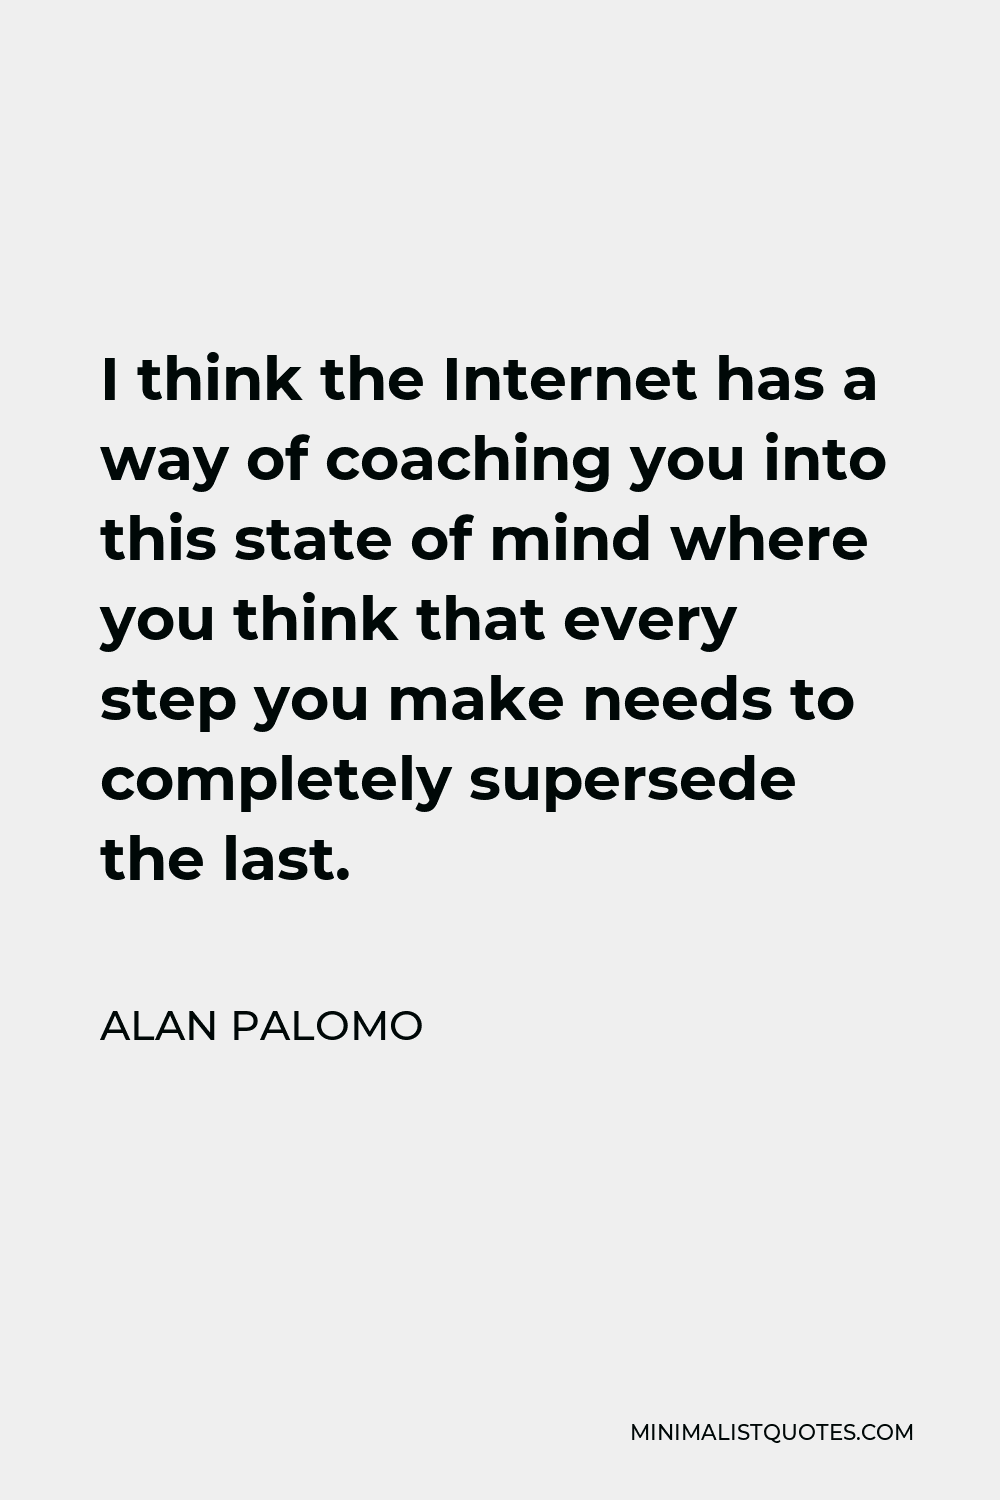 Alan Palomo Quote - I think the Internet has a way of coaching you into this state of mind where you think that every step you make needs to completely supersede the last.